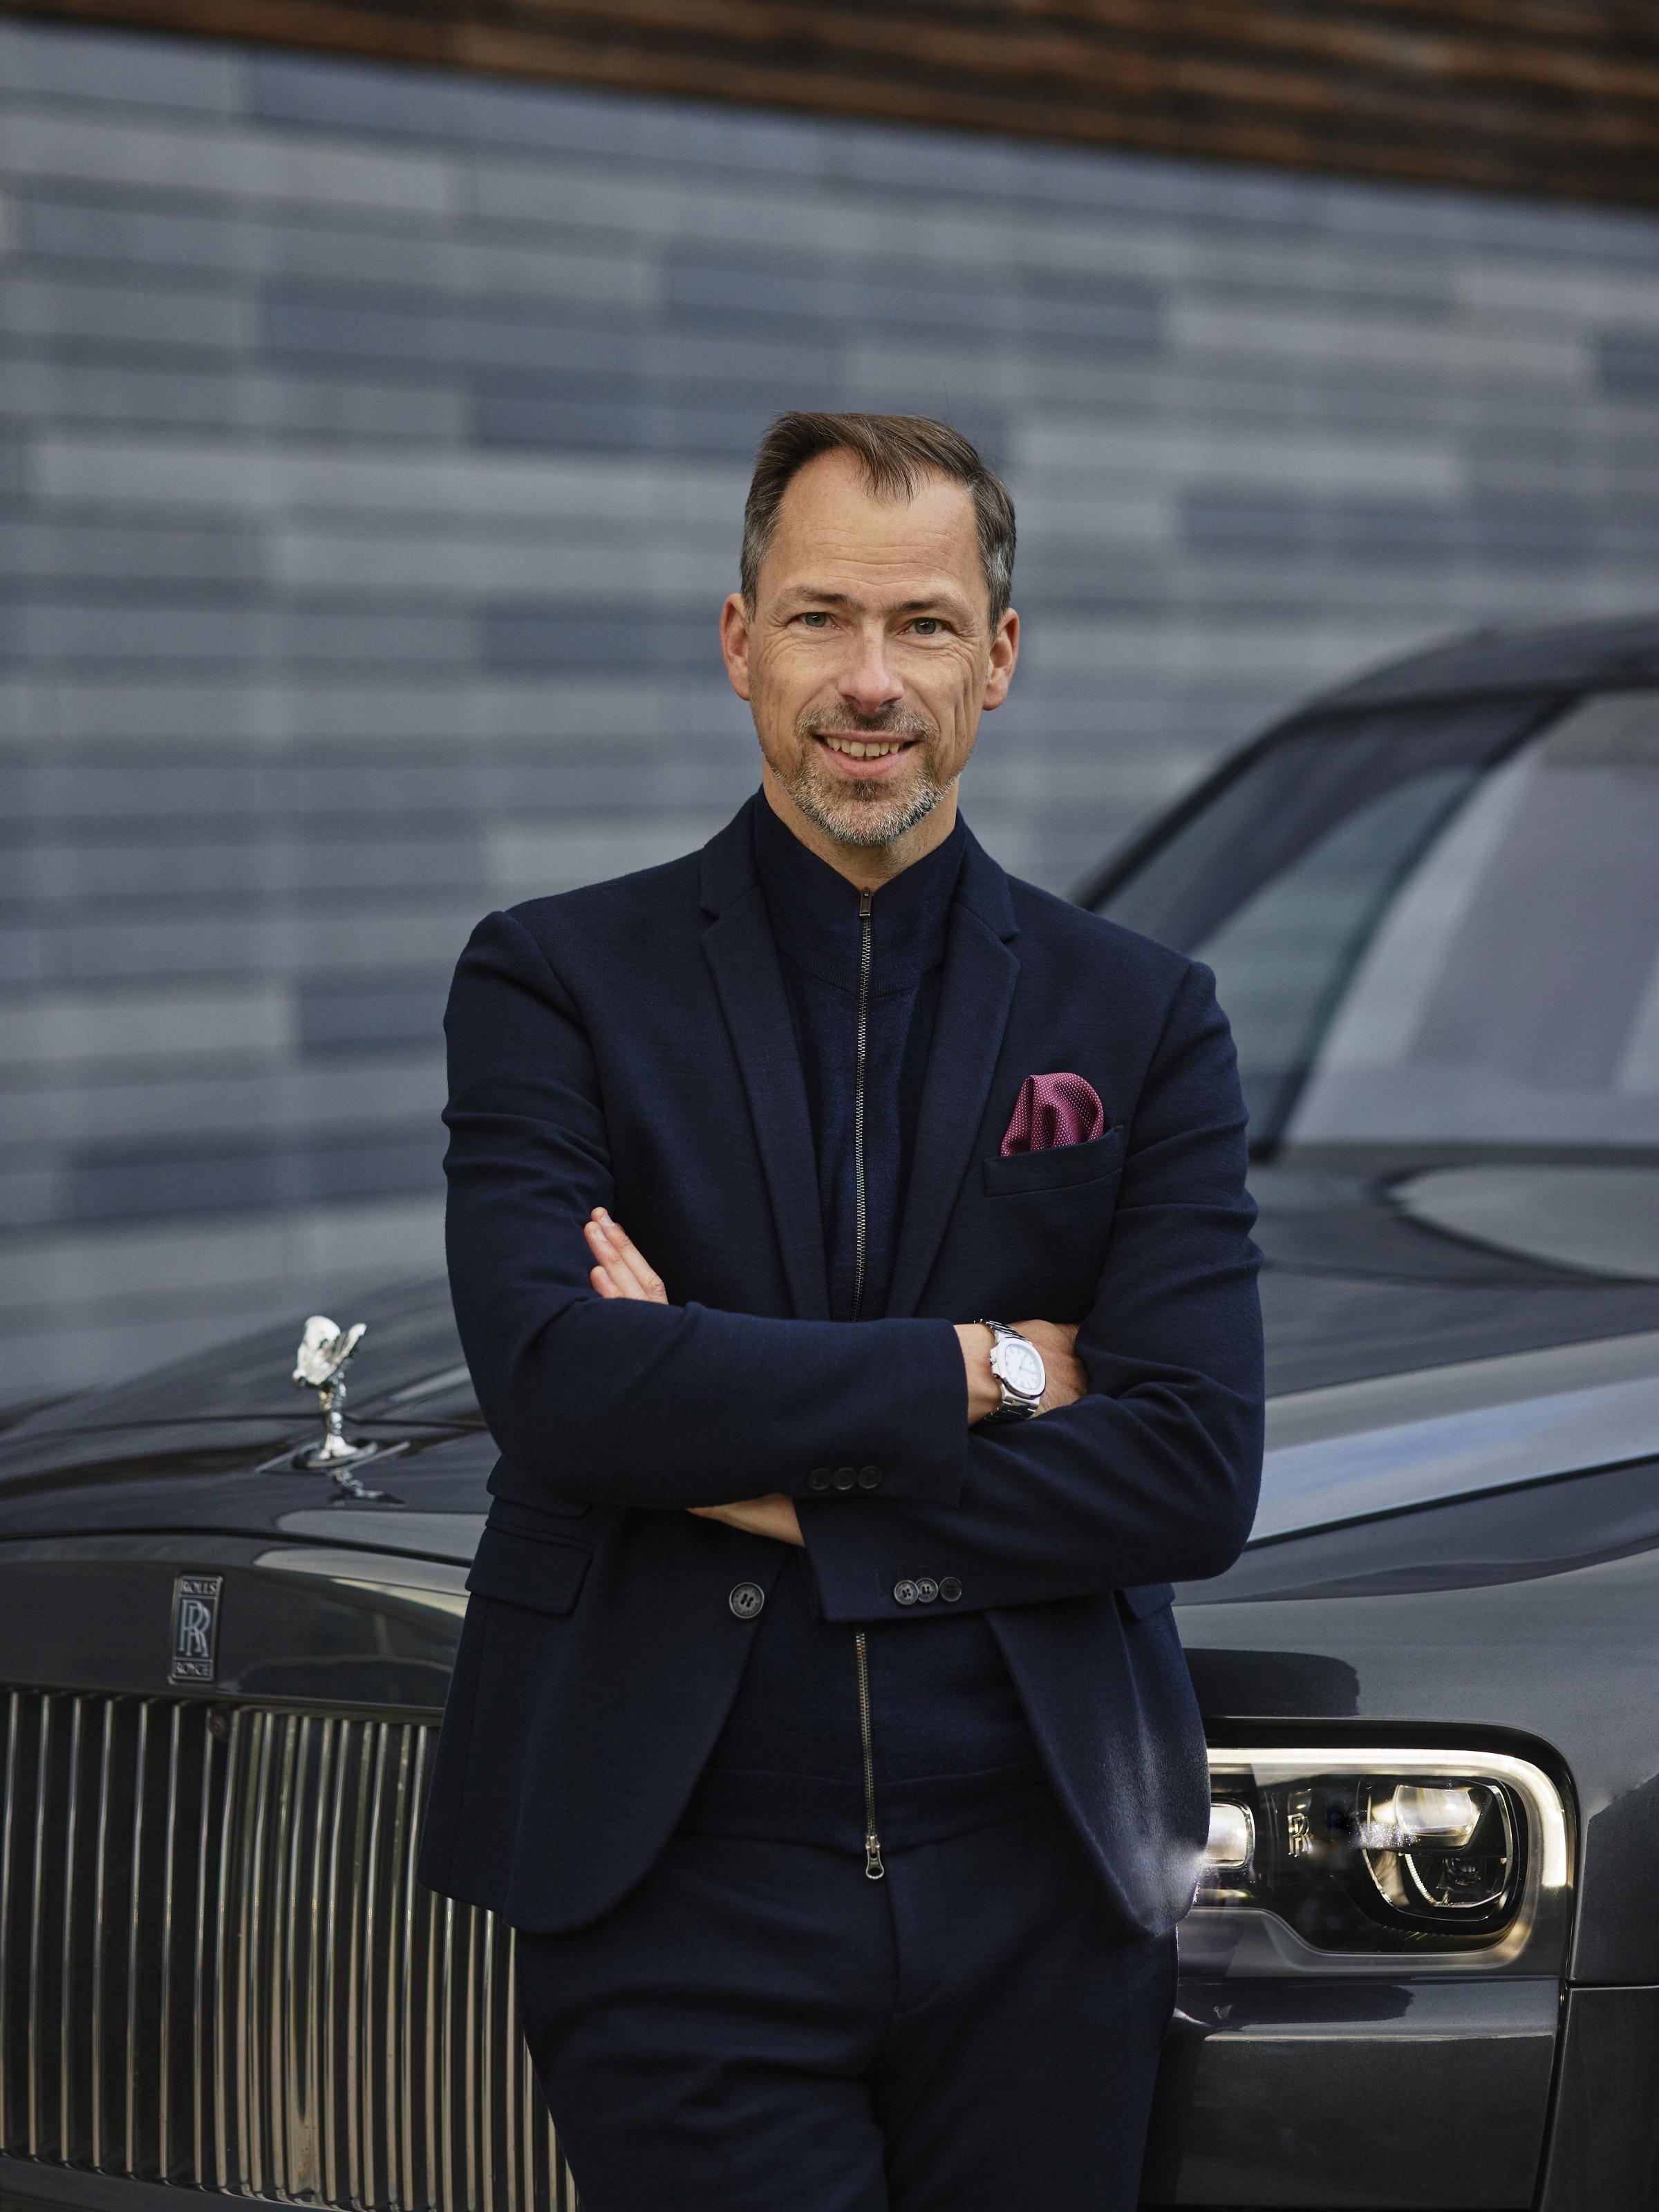 Anders Warming has been appointed as the new director of design at Rolls Royce, based at Goodwood, Sussex